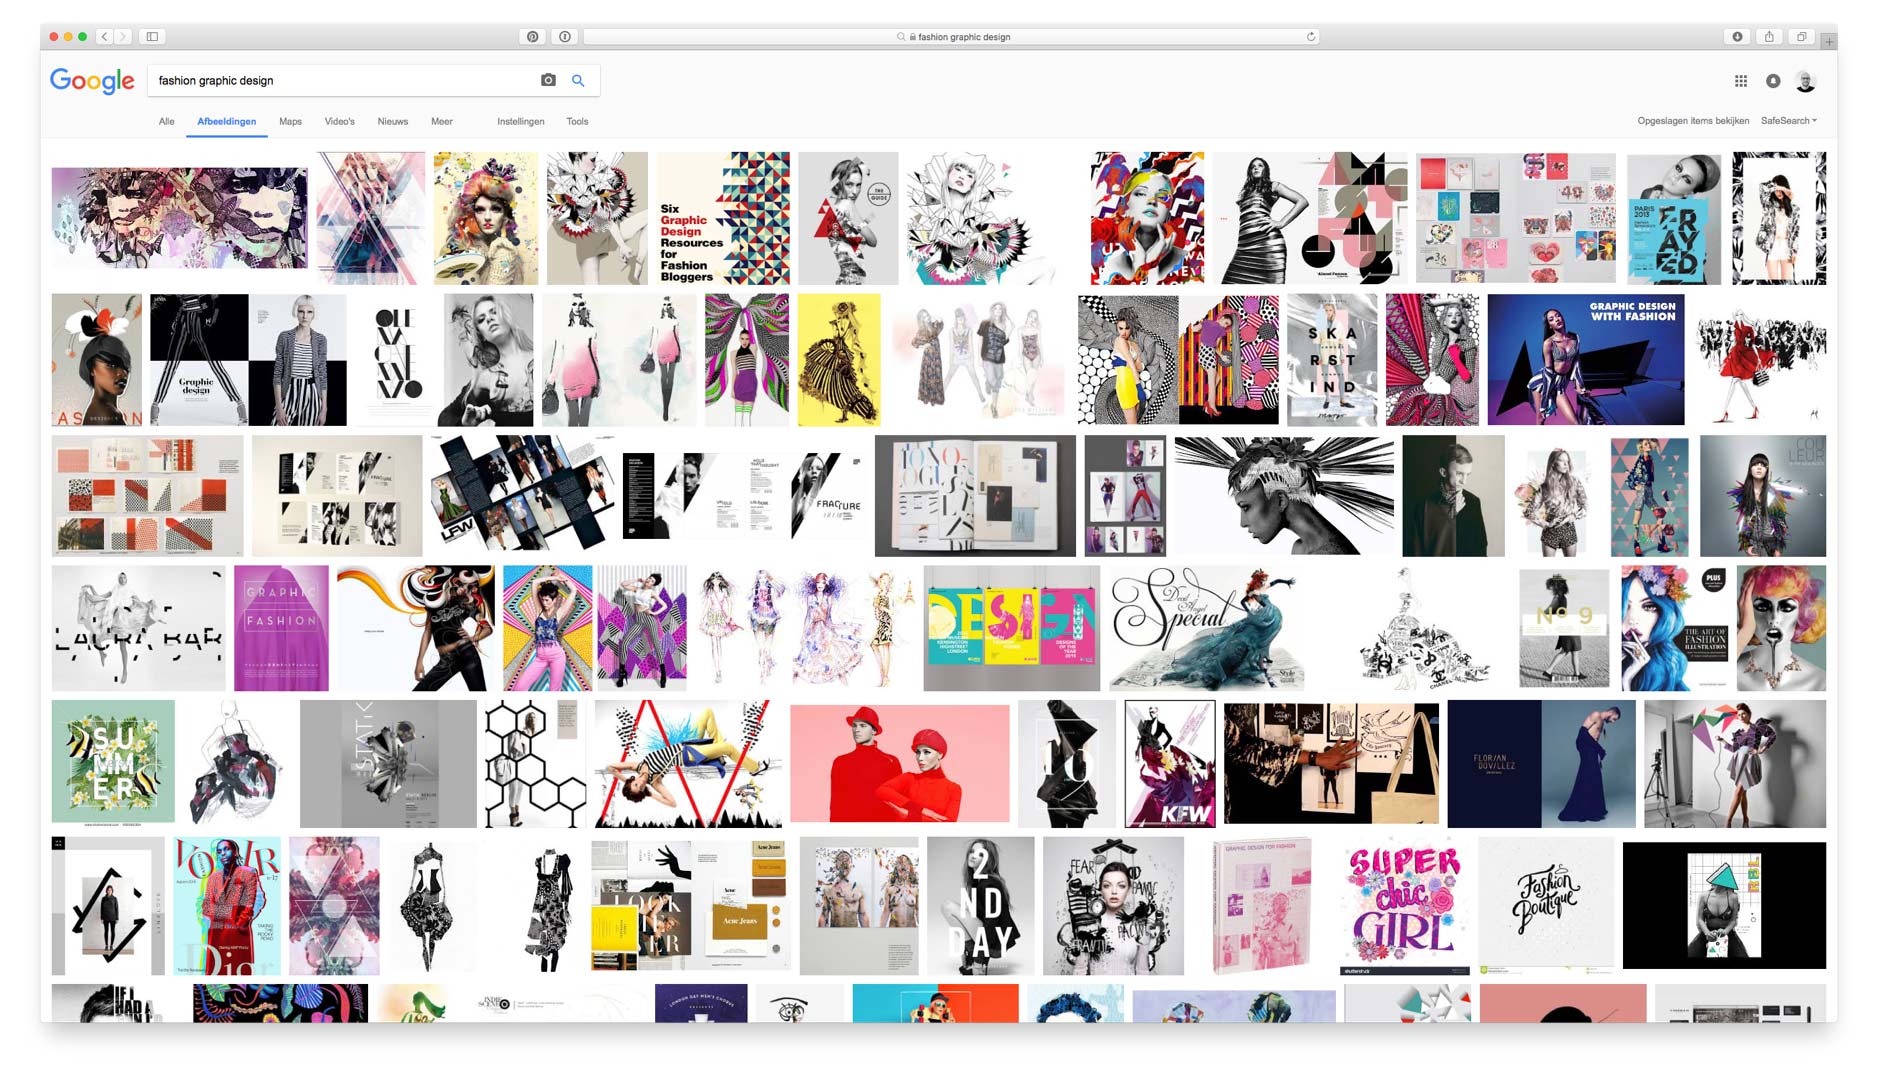 Google Images search result page for Fashion Graphic Design